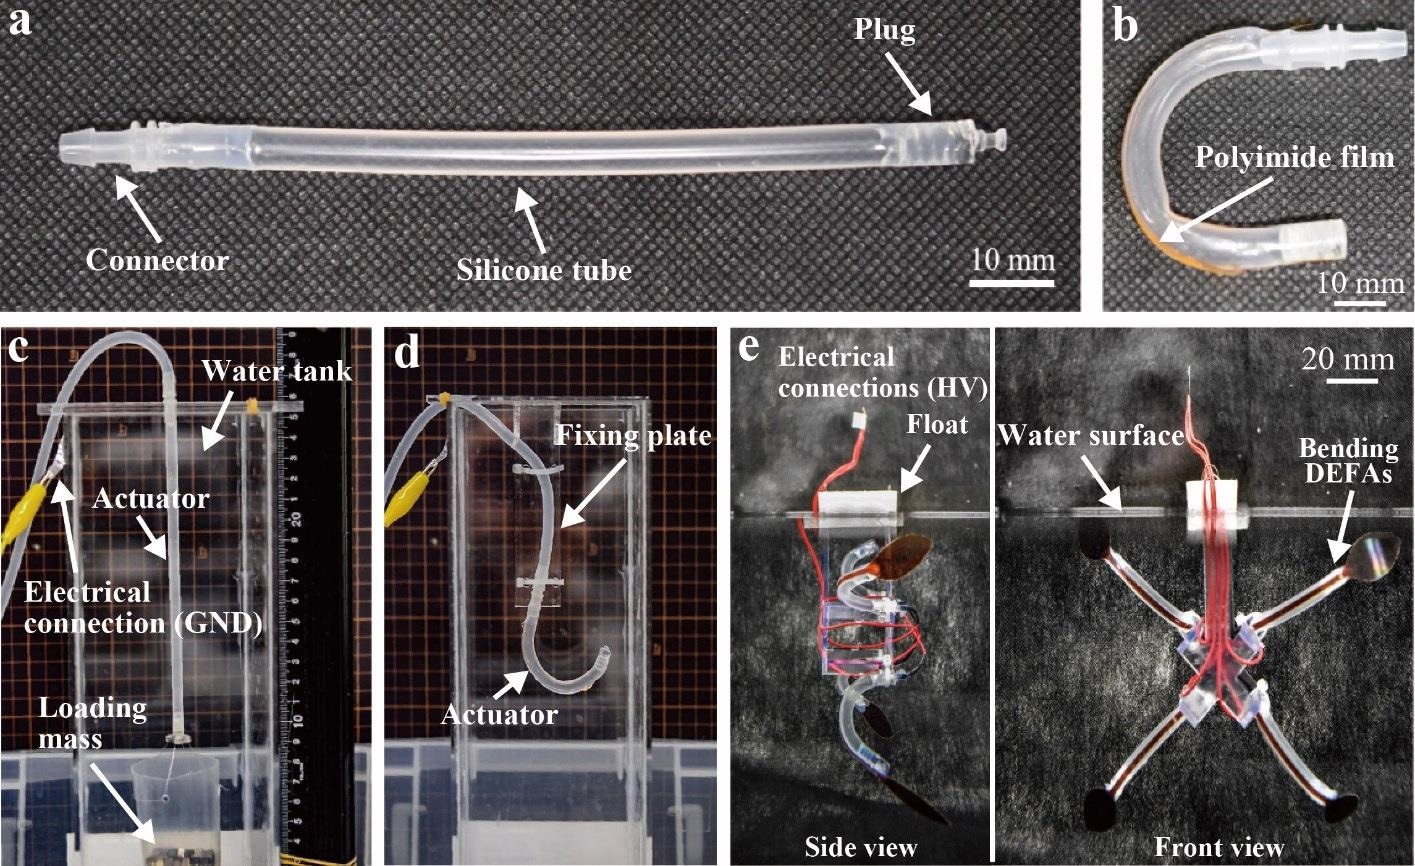 (a) Fabricated linear-type DEFA (without aqueous electrode). (b) Fabricated bending-type DEFA (without aqueous electrode). (c) Experimental setup to characterize linear-type DEFA and (d) bending-type DEFA. (e) Jellyfish-type underwater robot using four bending-type DEFAs.